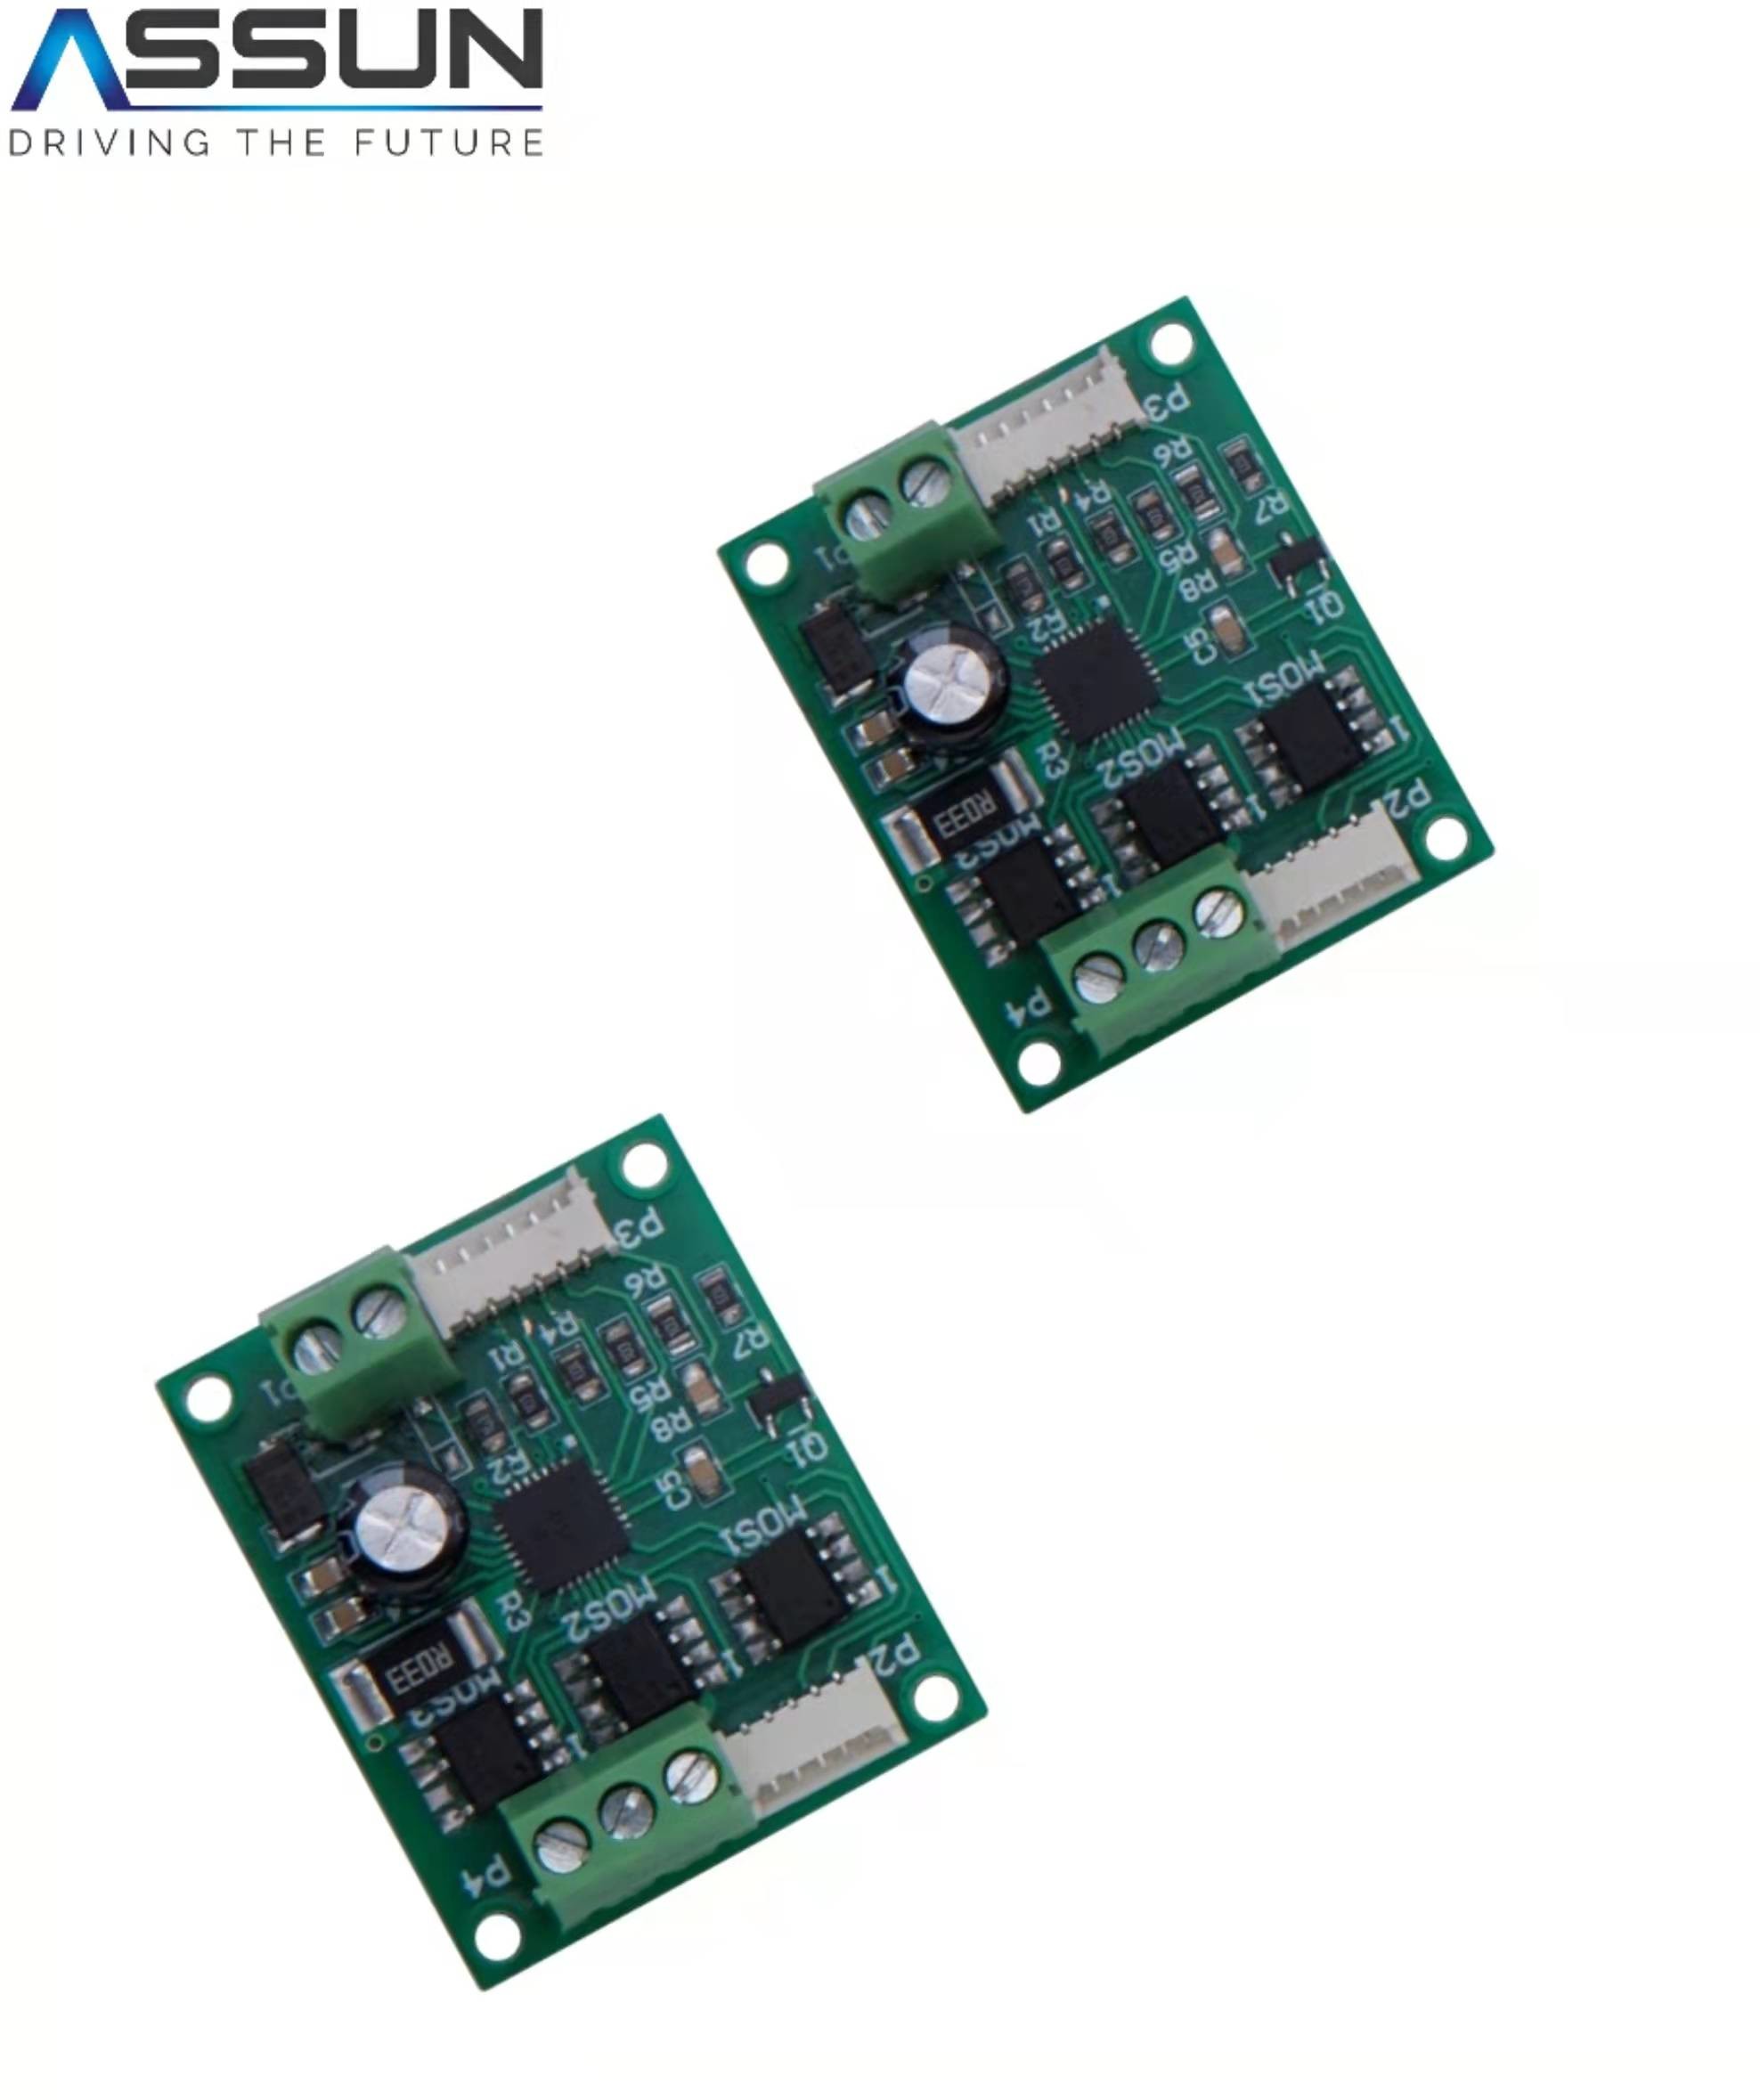 Buy cheap 3A Rc Brushless Motor Speed Controller ，Adjustable Speed Motor Controller product